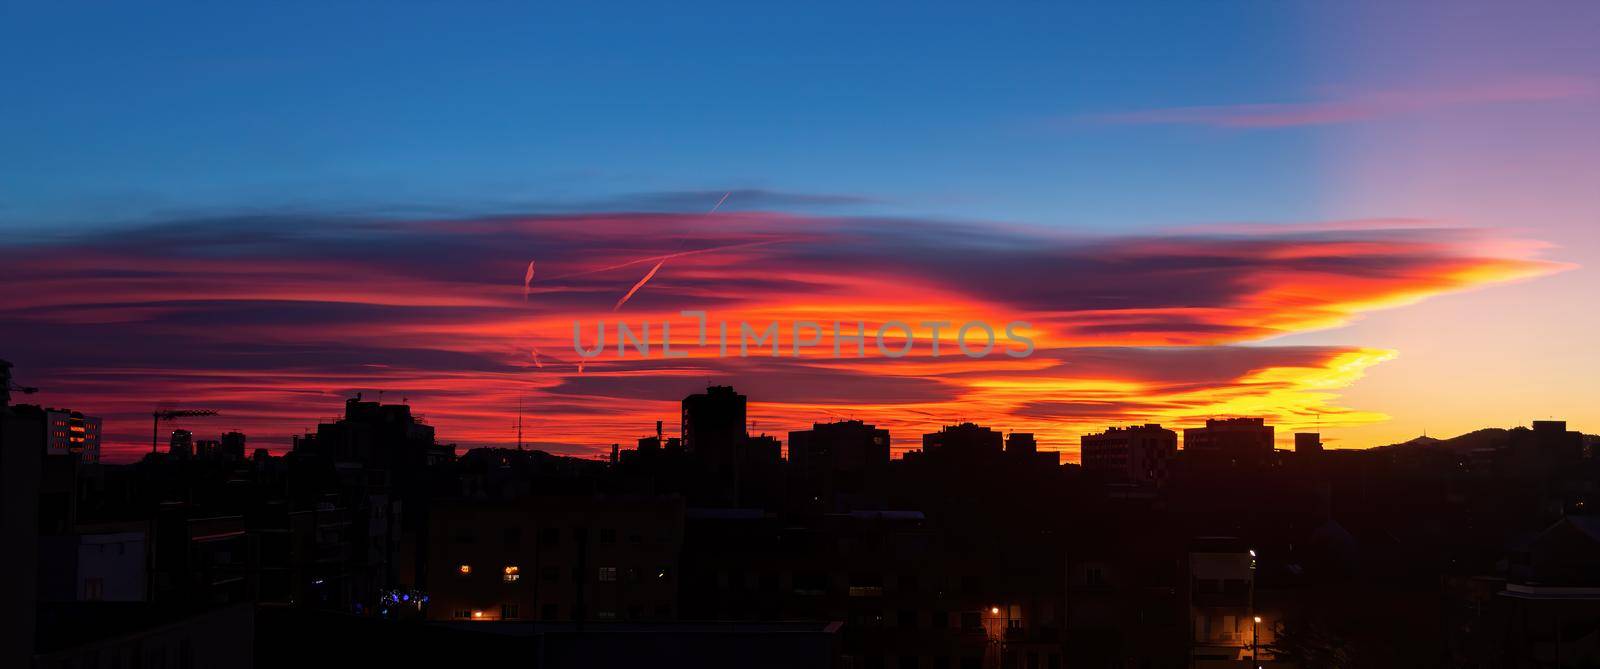 Amazing sunset with orange, pink and red stratus clouds over the city with traces from the plane in the sky. Background for forecast and meteorology concept. Barcelona, Spain.